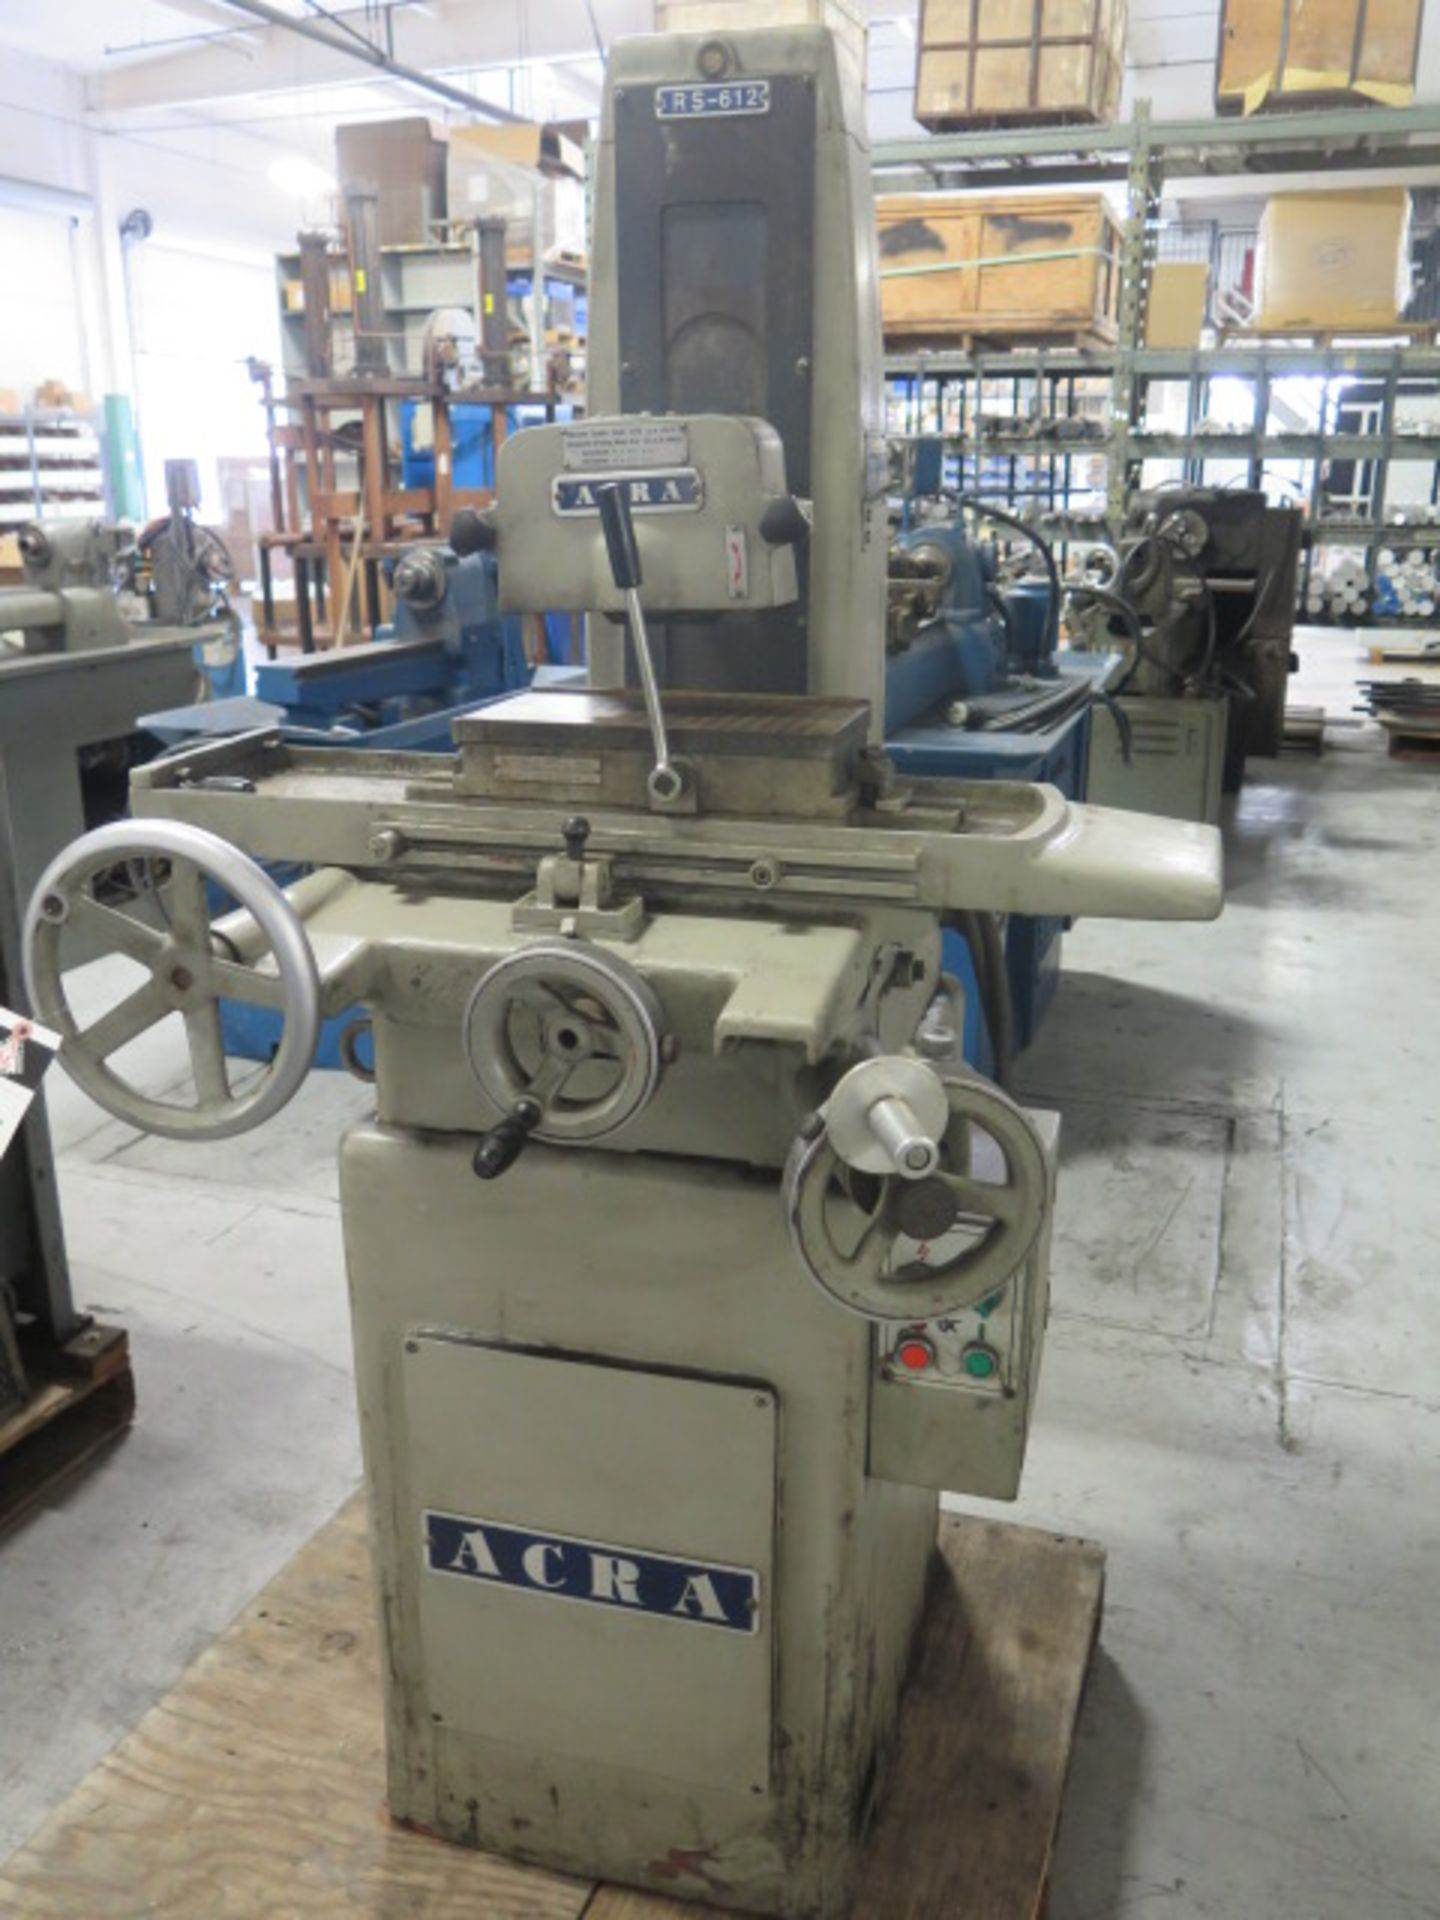 Acra Kong Kuang mdl. RS-612 6” x 12” Surface Grinder s/n 612012 w/ Magnetic Chuck - Image 2 of 7